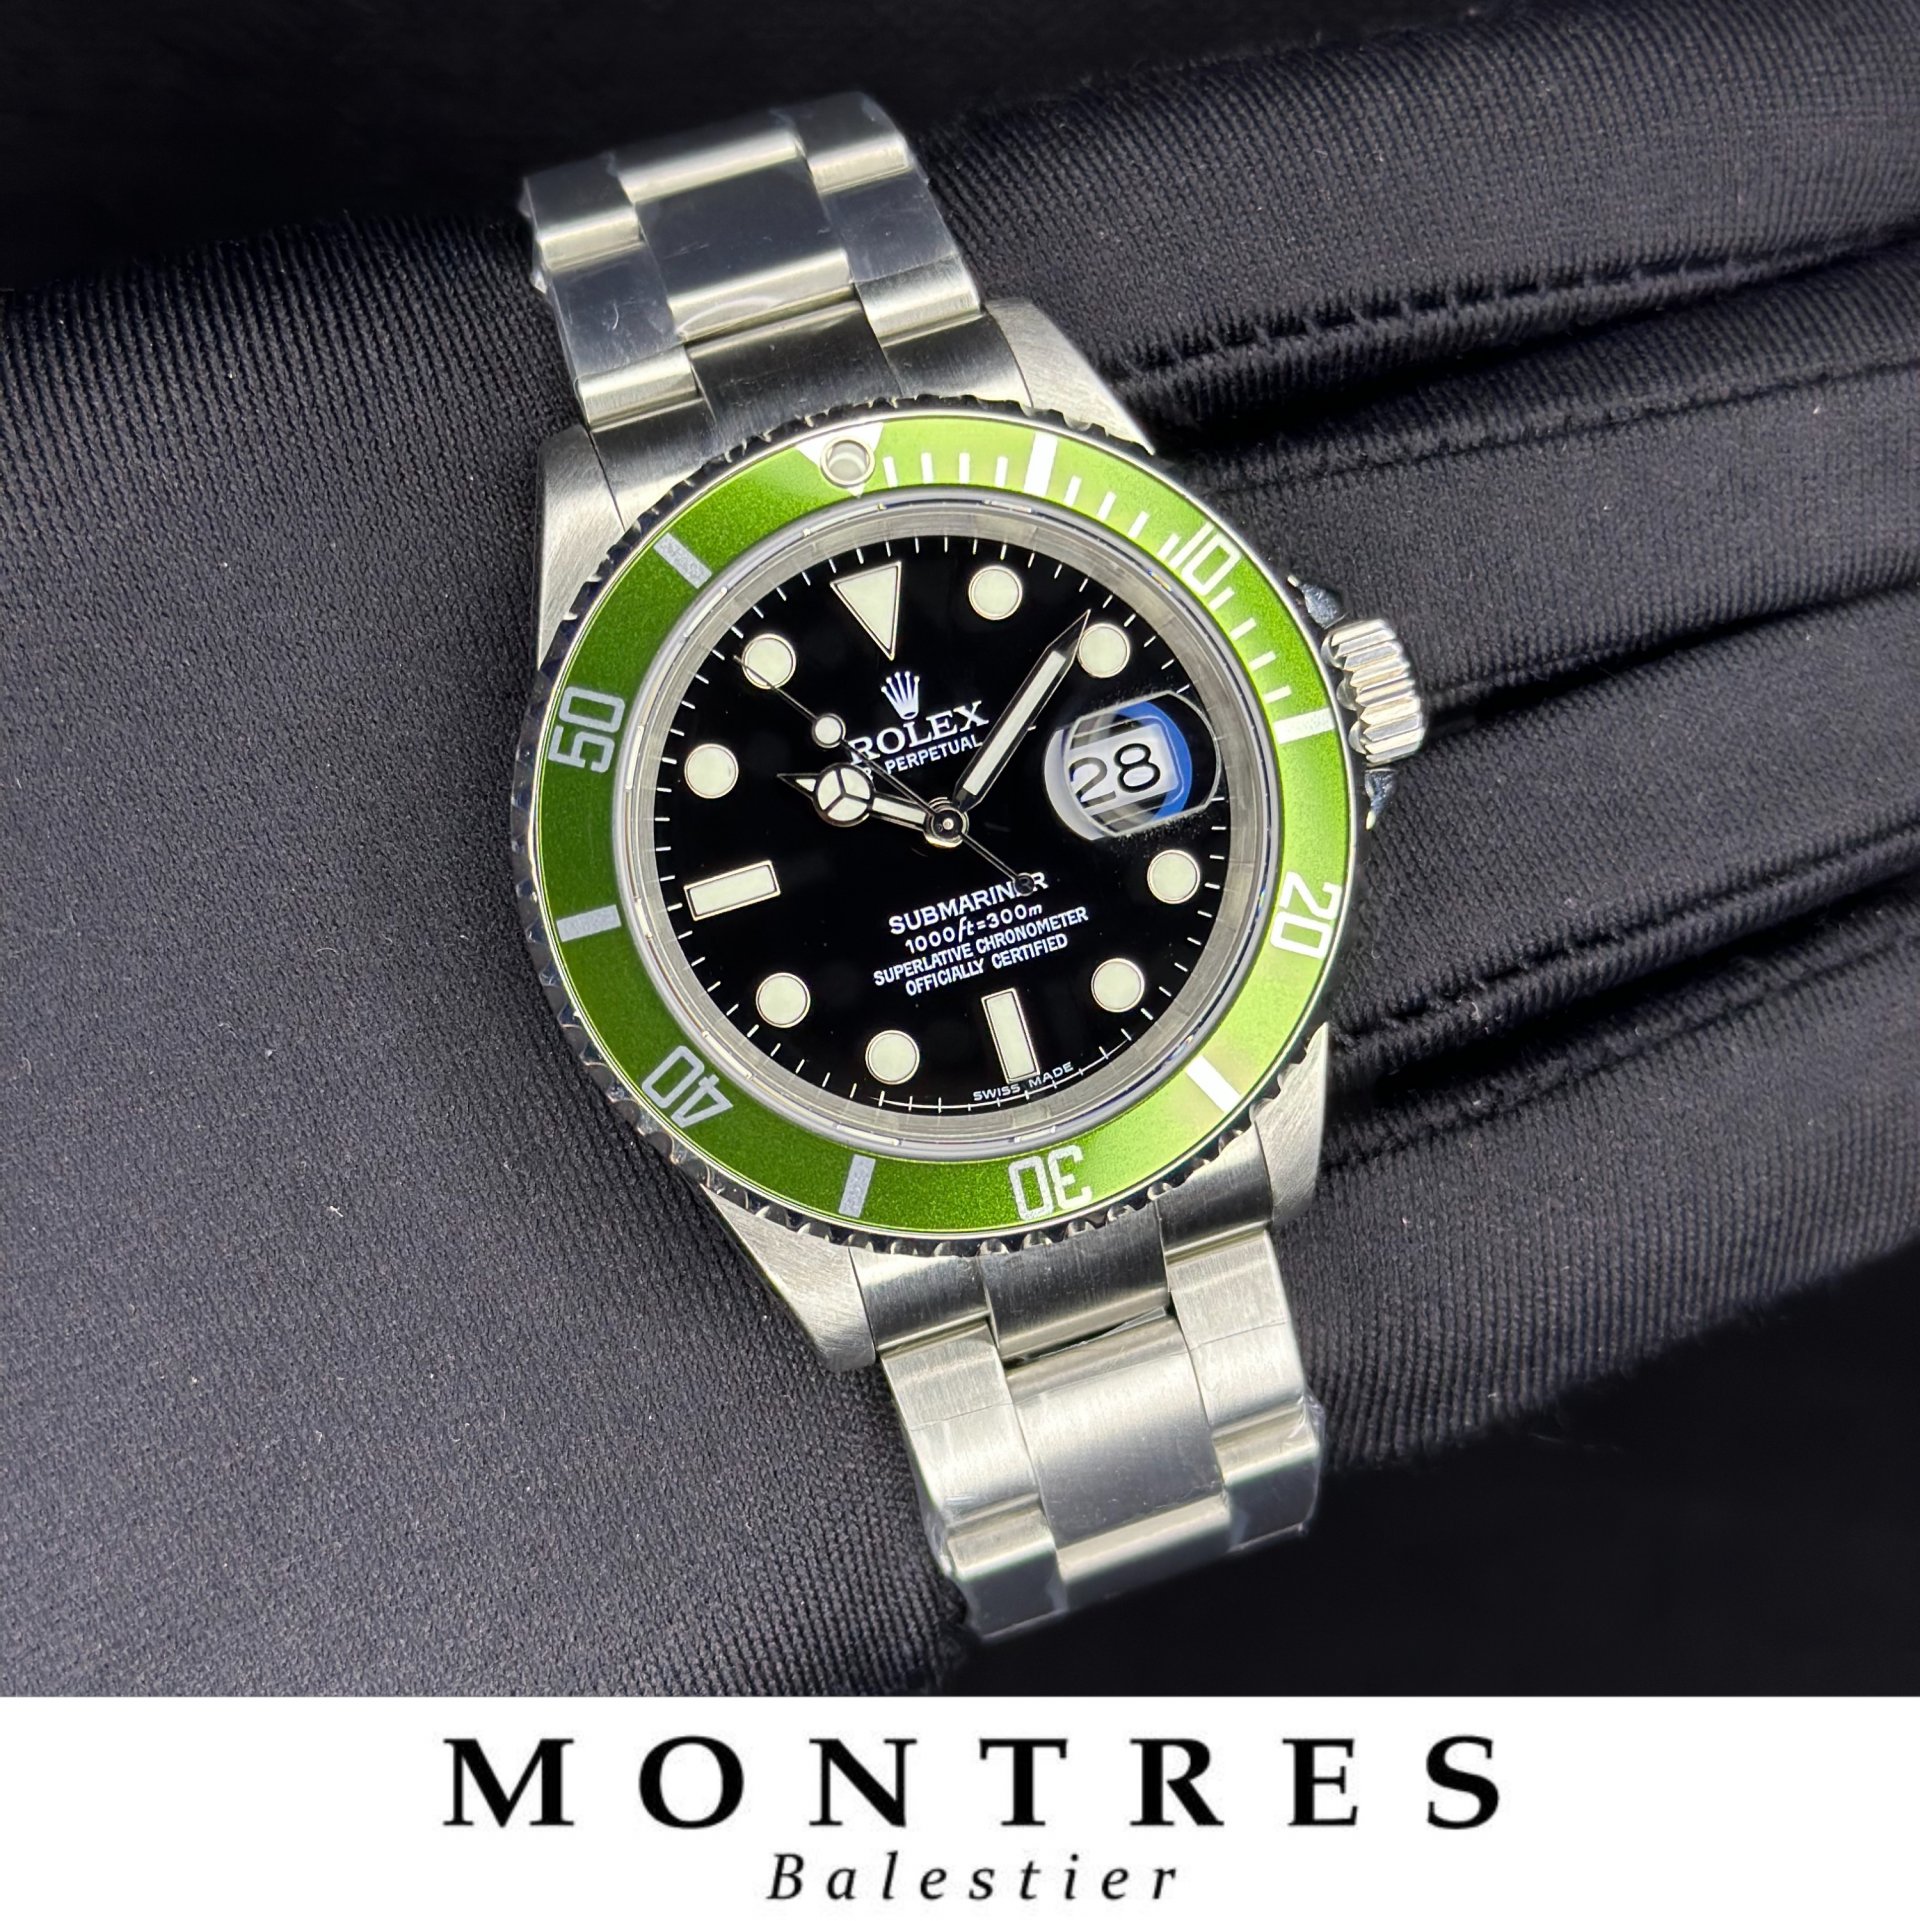 Pre Owned Rolex Submariner 16610 LV Black Dial - AllWatchMarket